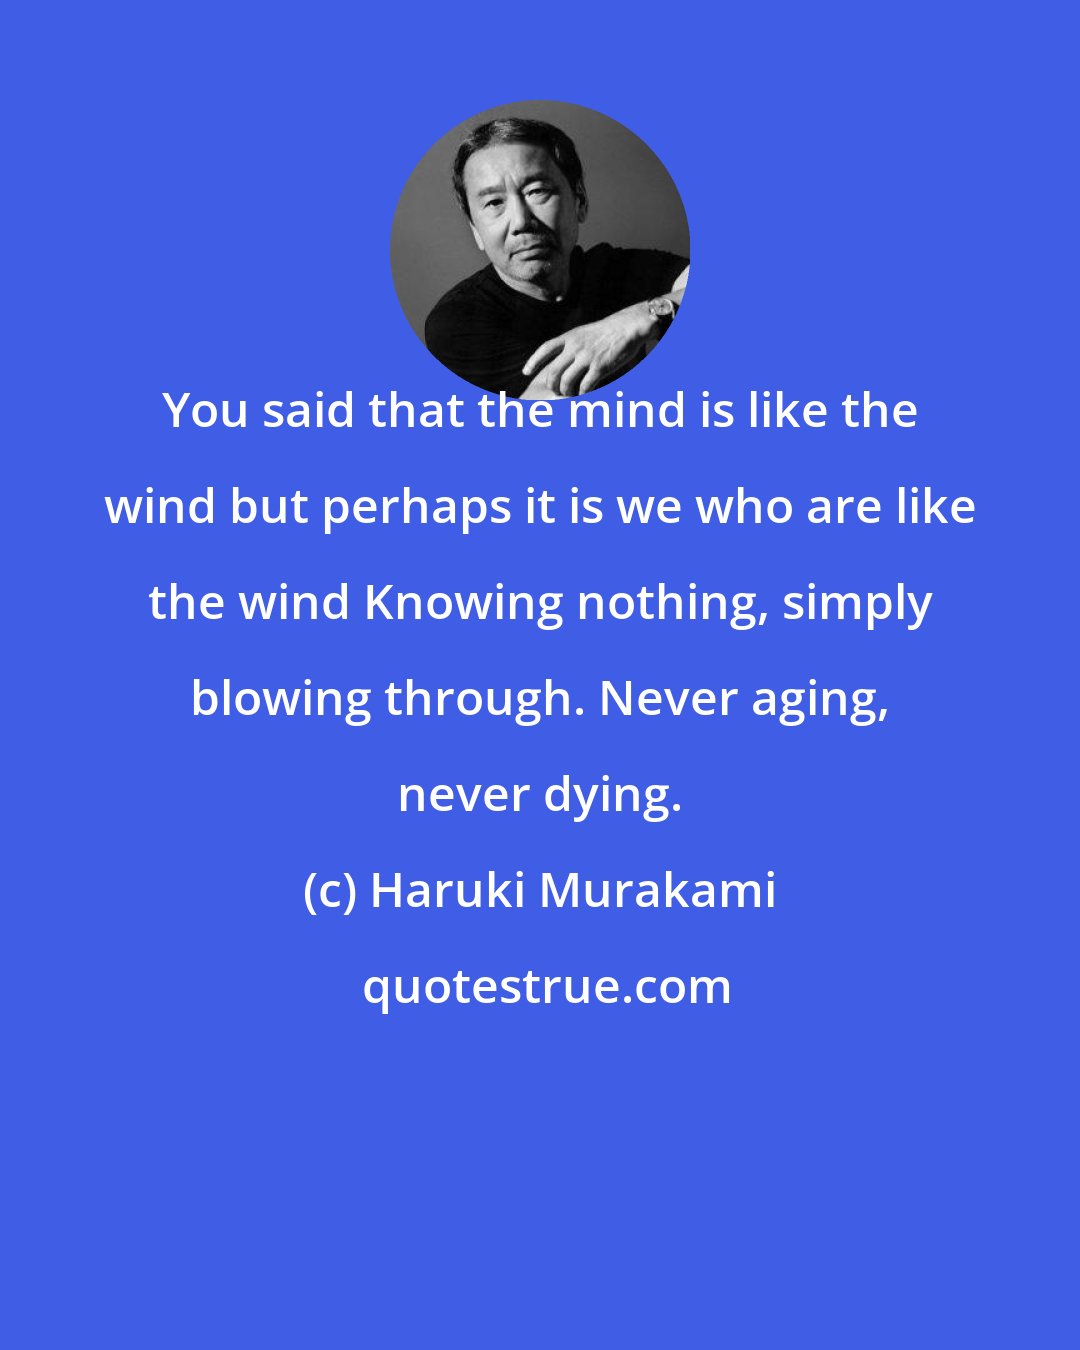 Haruki Murakami: You said that the mind is like the wind but perhaps it is we who are like the wind Knowing nothing, simply blowing through. Never aging, never dying.